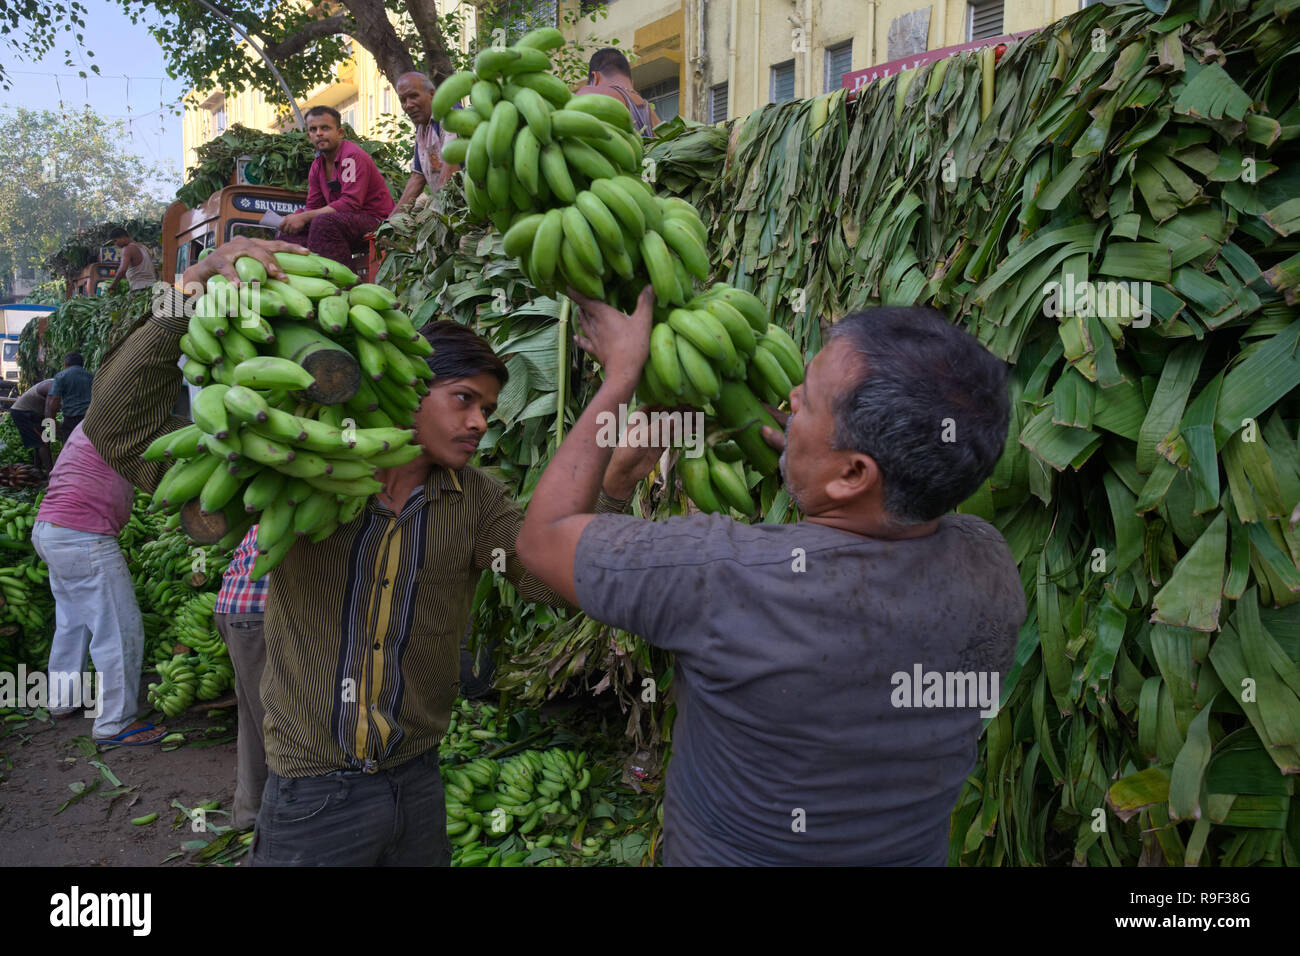 A load of yet unripe bananas delivered by truck from Tamil Nadu in South India, being unloaded at Matunga market, Mumbai Stock Photo